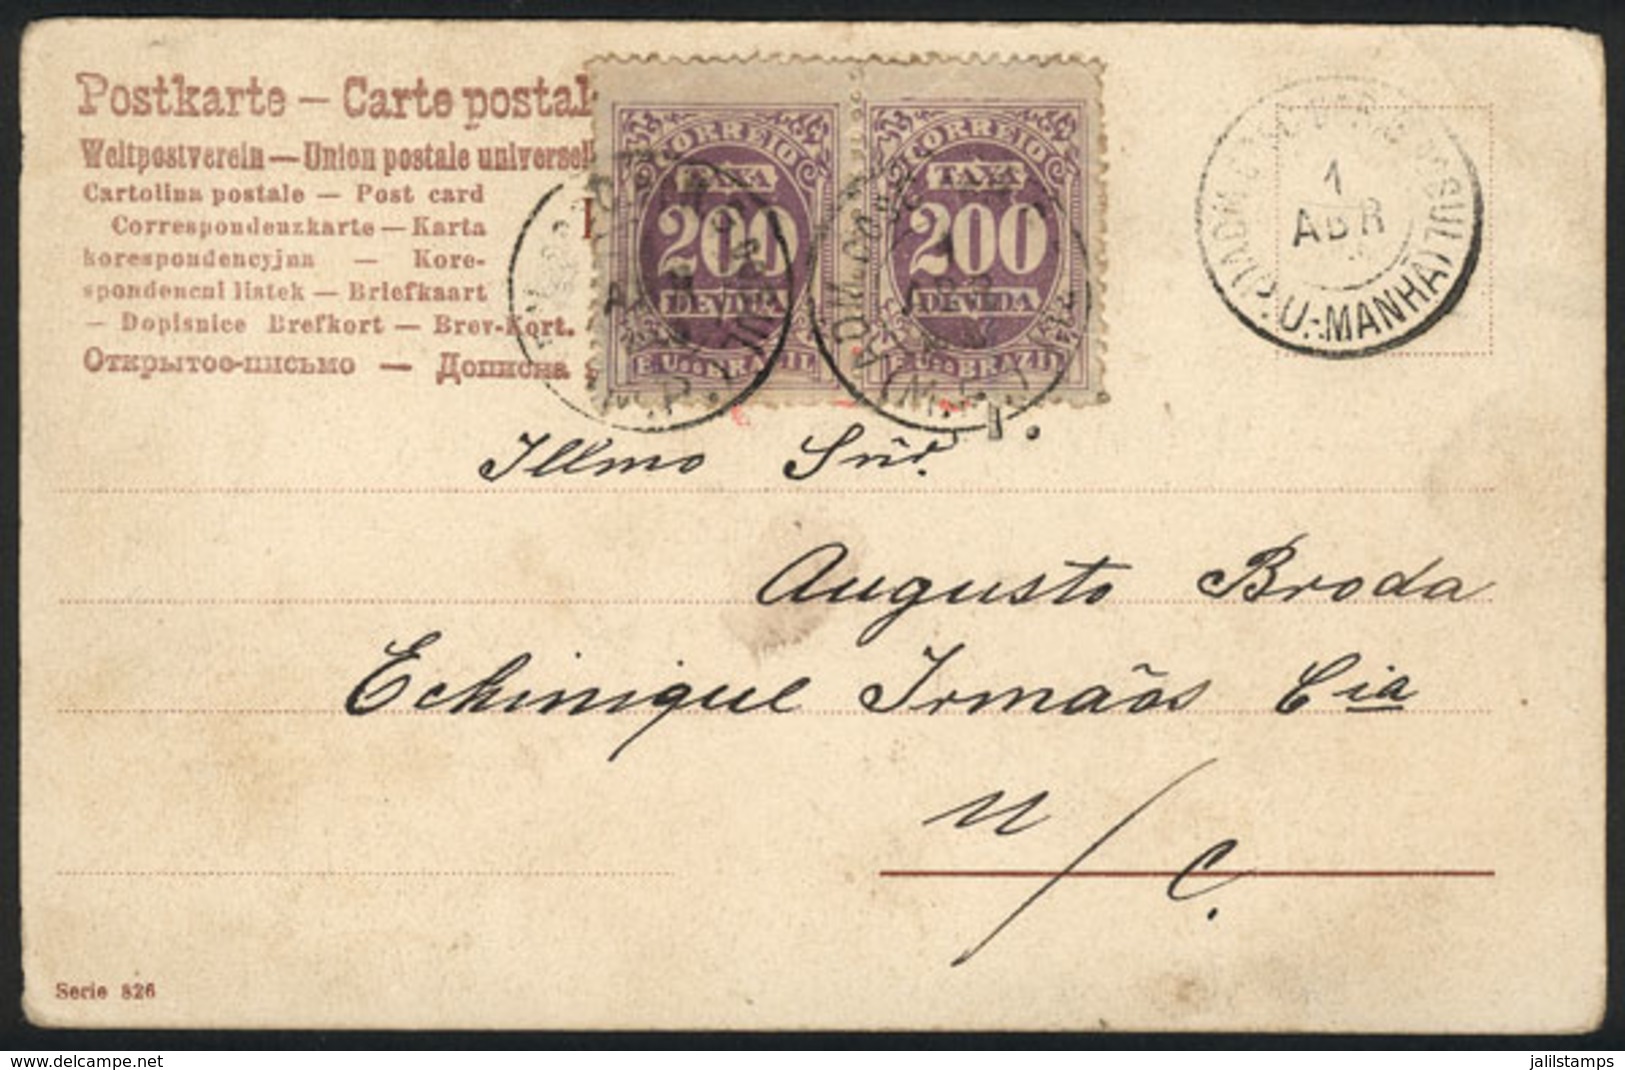 BRAZIL: Postcard Used In Rio Grande Do Sul On 1/AP/1909, Franked With 400Rs. Using A Pair Of Postage Due Stamps Of 200Rs - Cartes-maximum